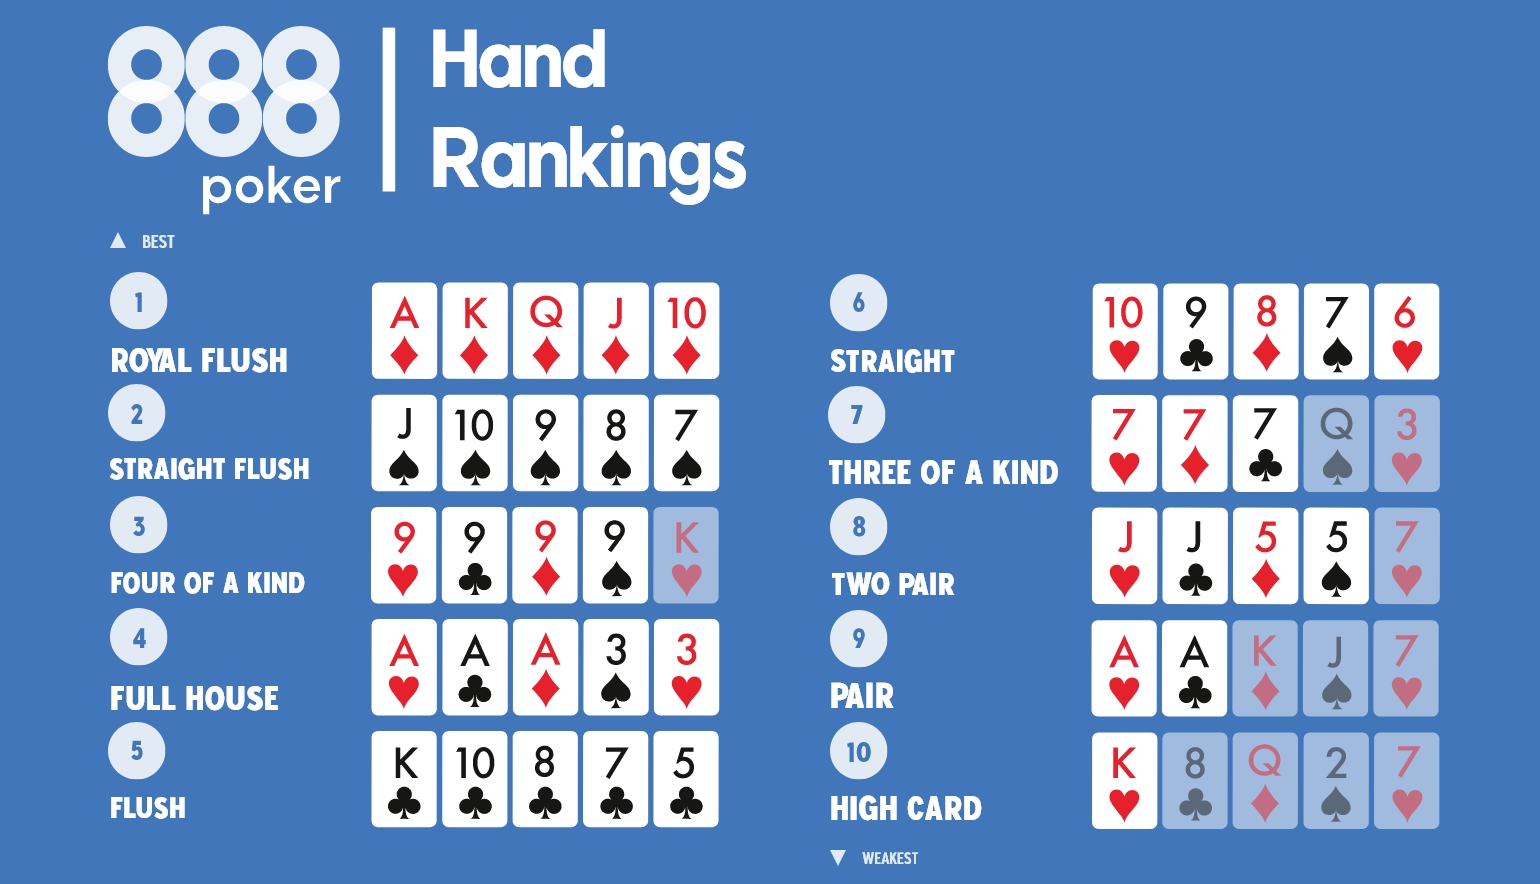 Poker Hands Ranked – What